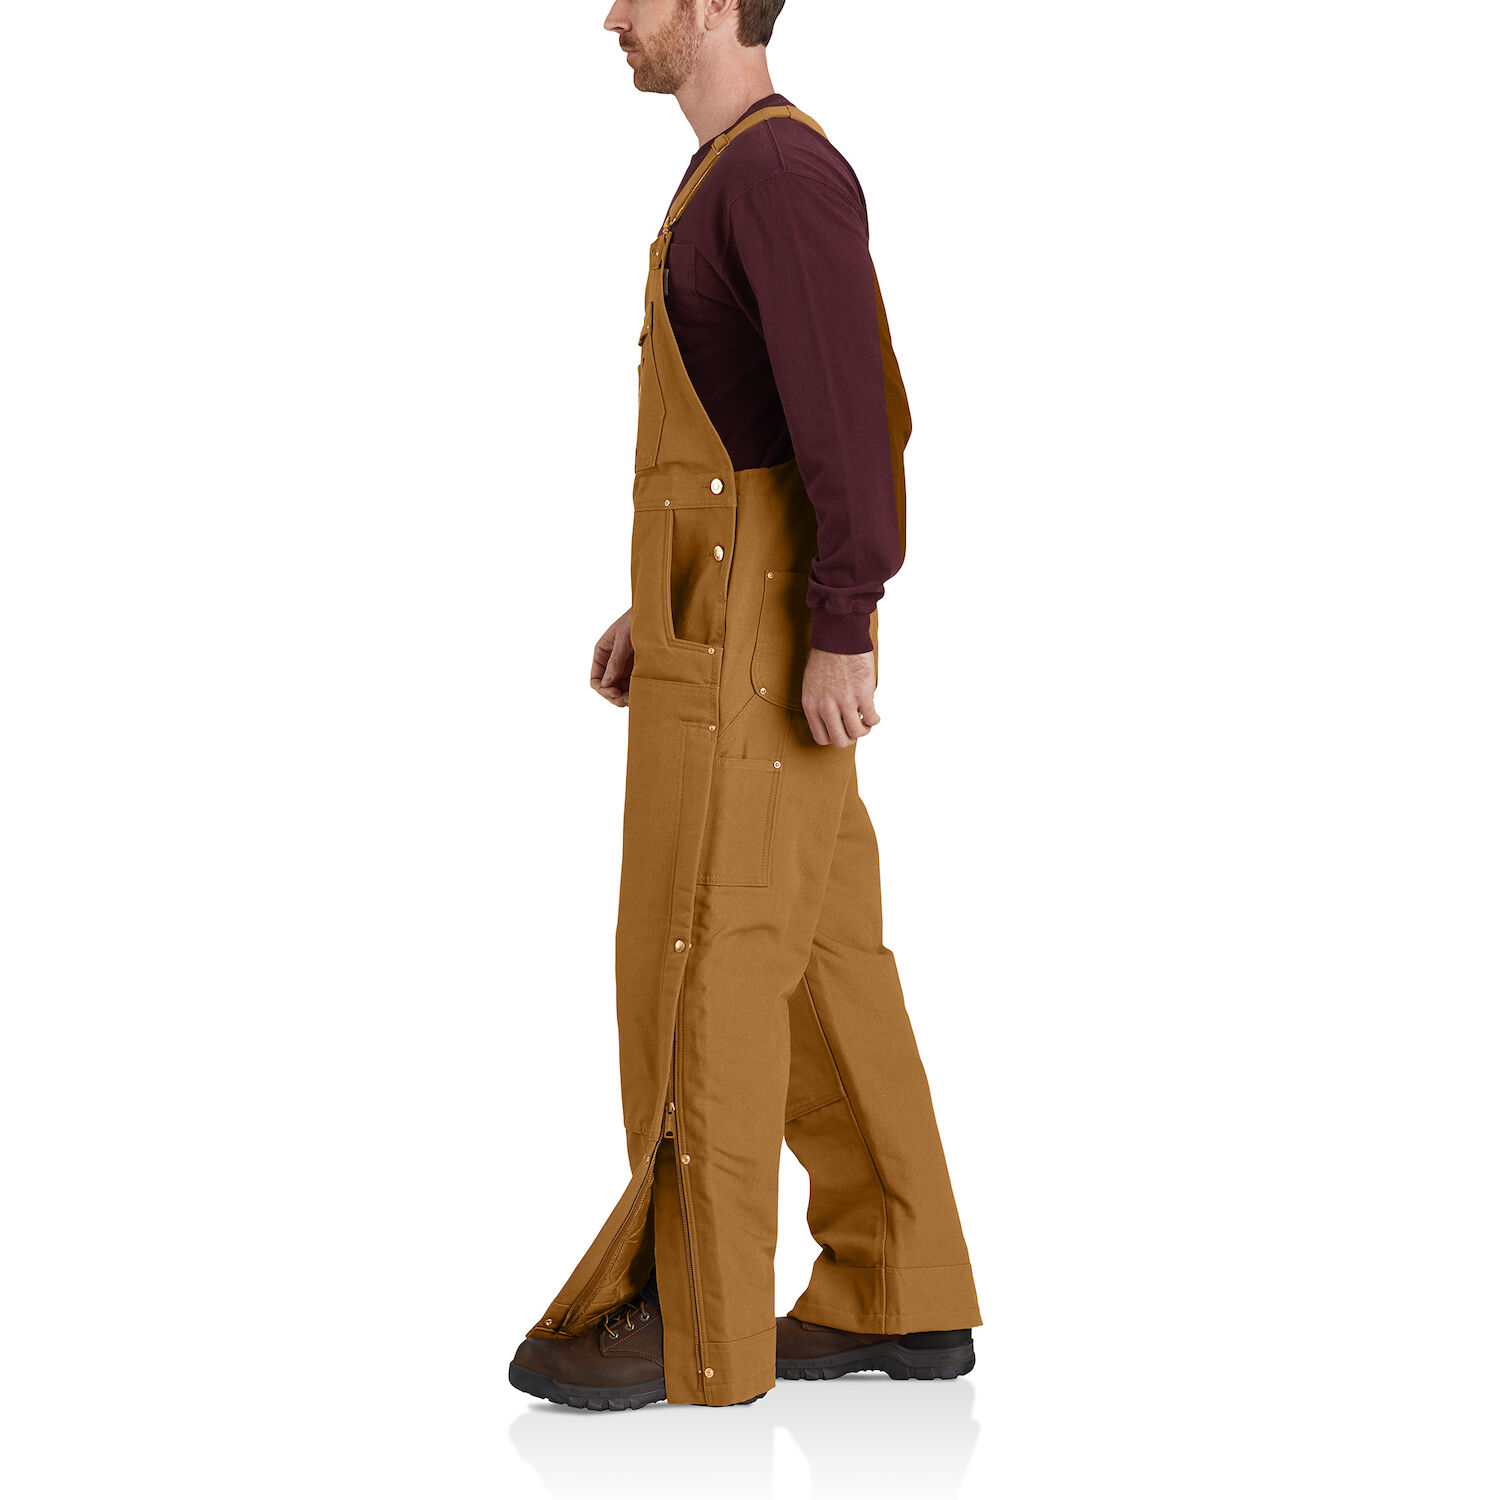 Carhartt Men's Loose Fit Firm Duck Insulated Bib Overall in